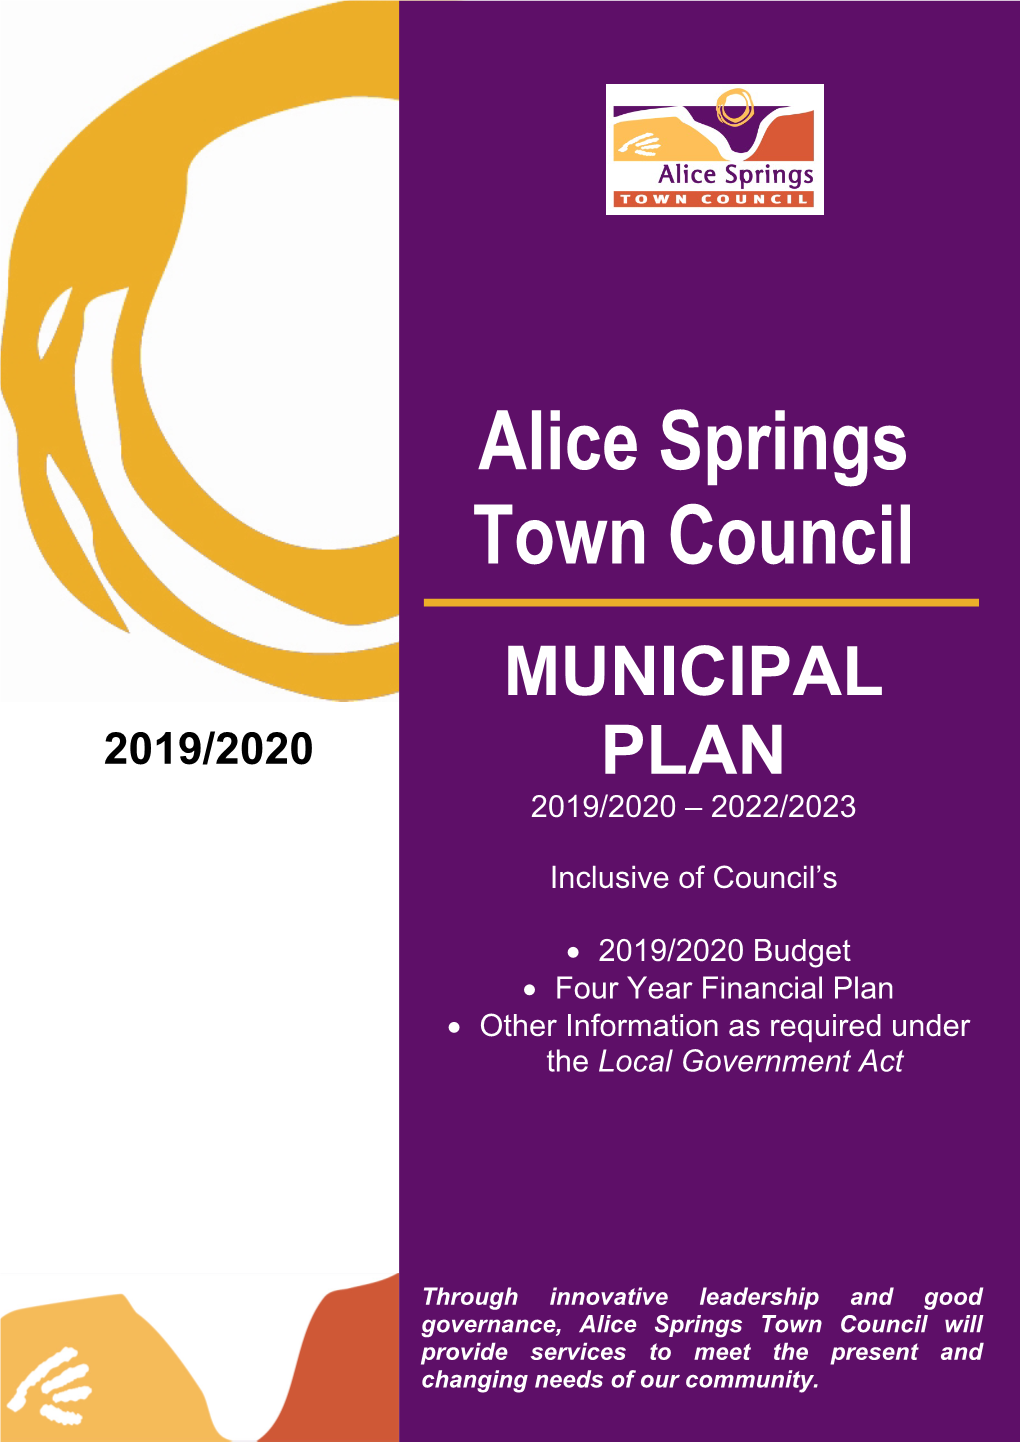 Alice Springs Town Council MUNICIPAL